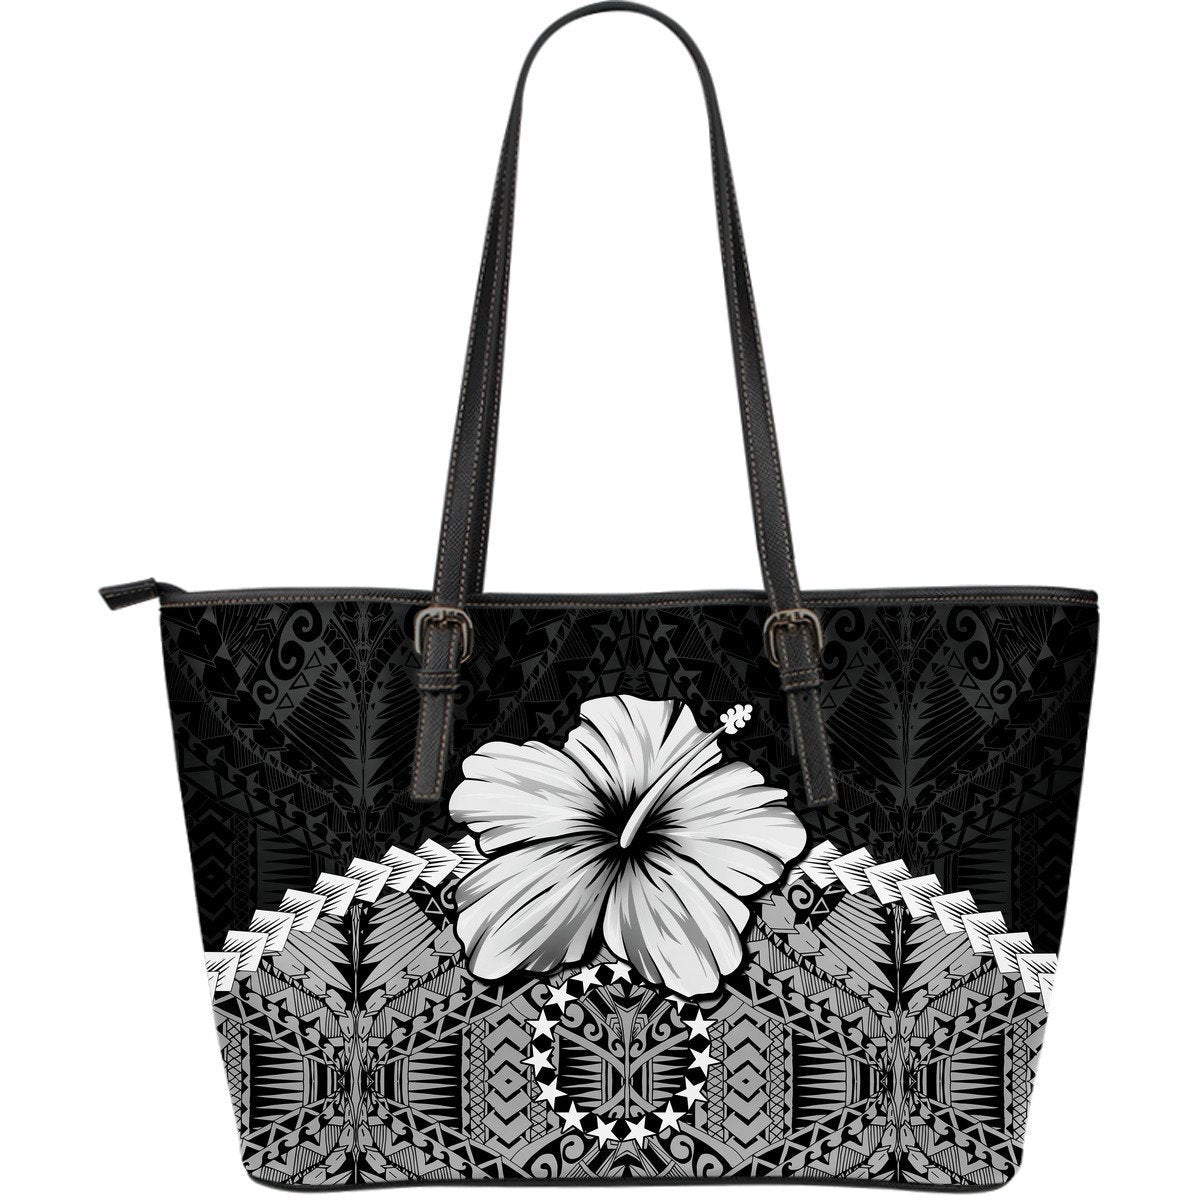 Cook Islands Leather Tote Bag - Hibiscus (Gray) Gray - Polynesian Pride